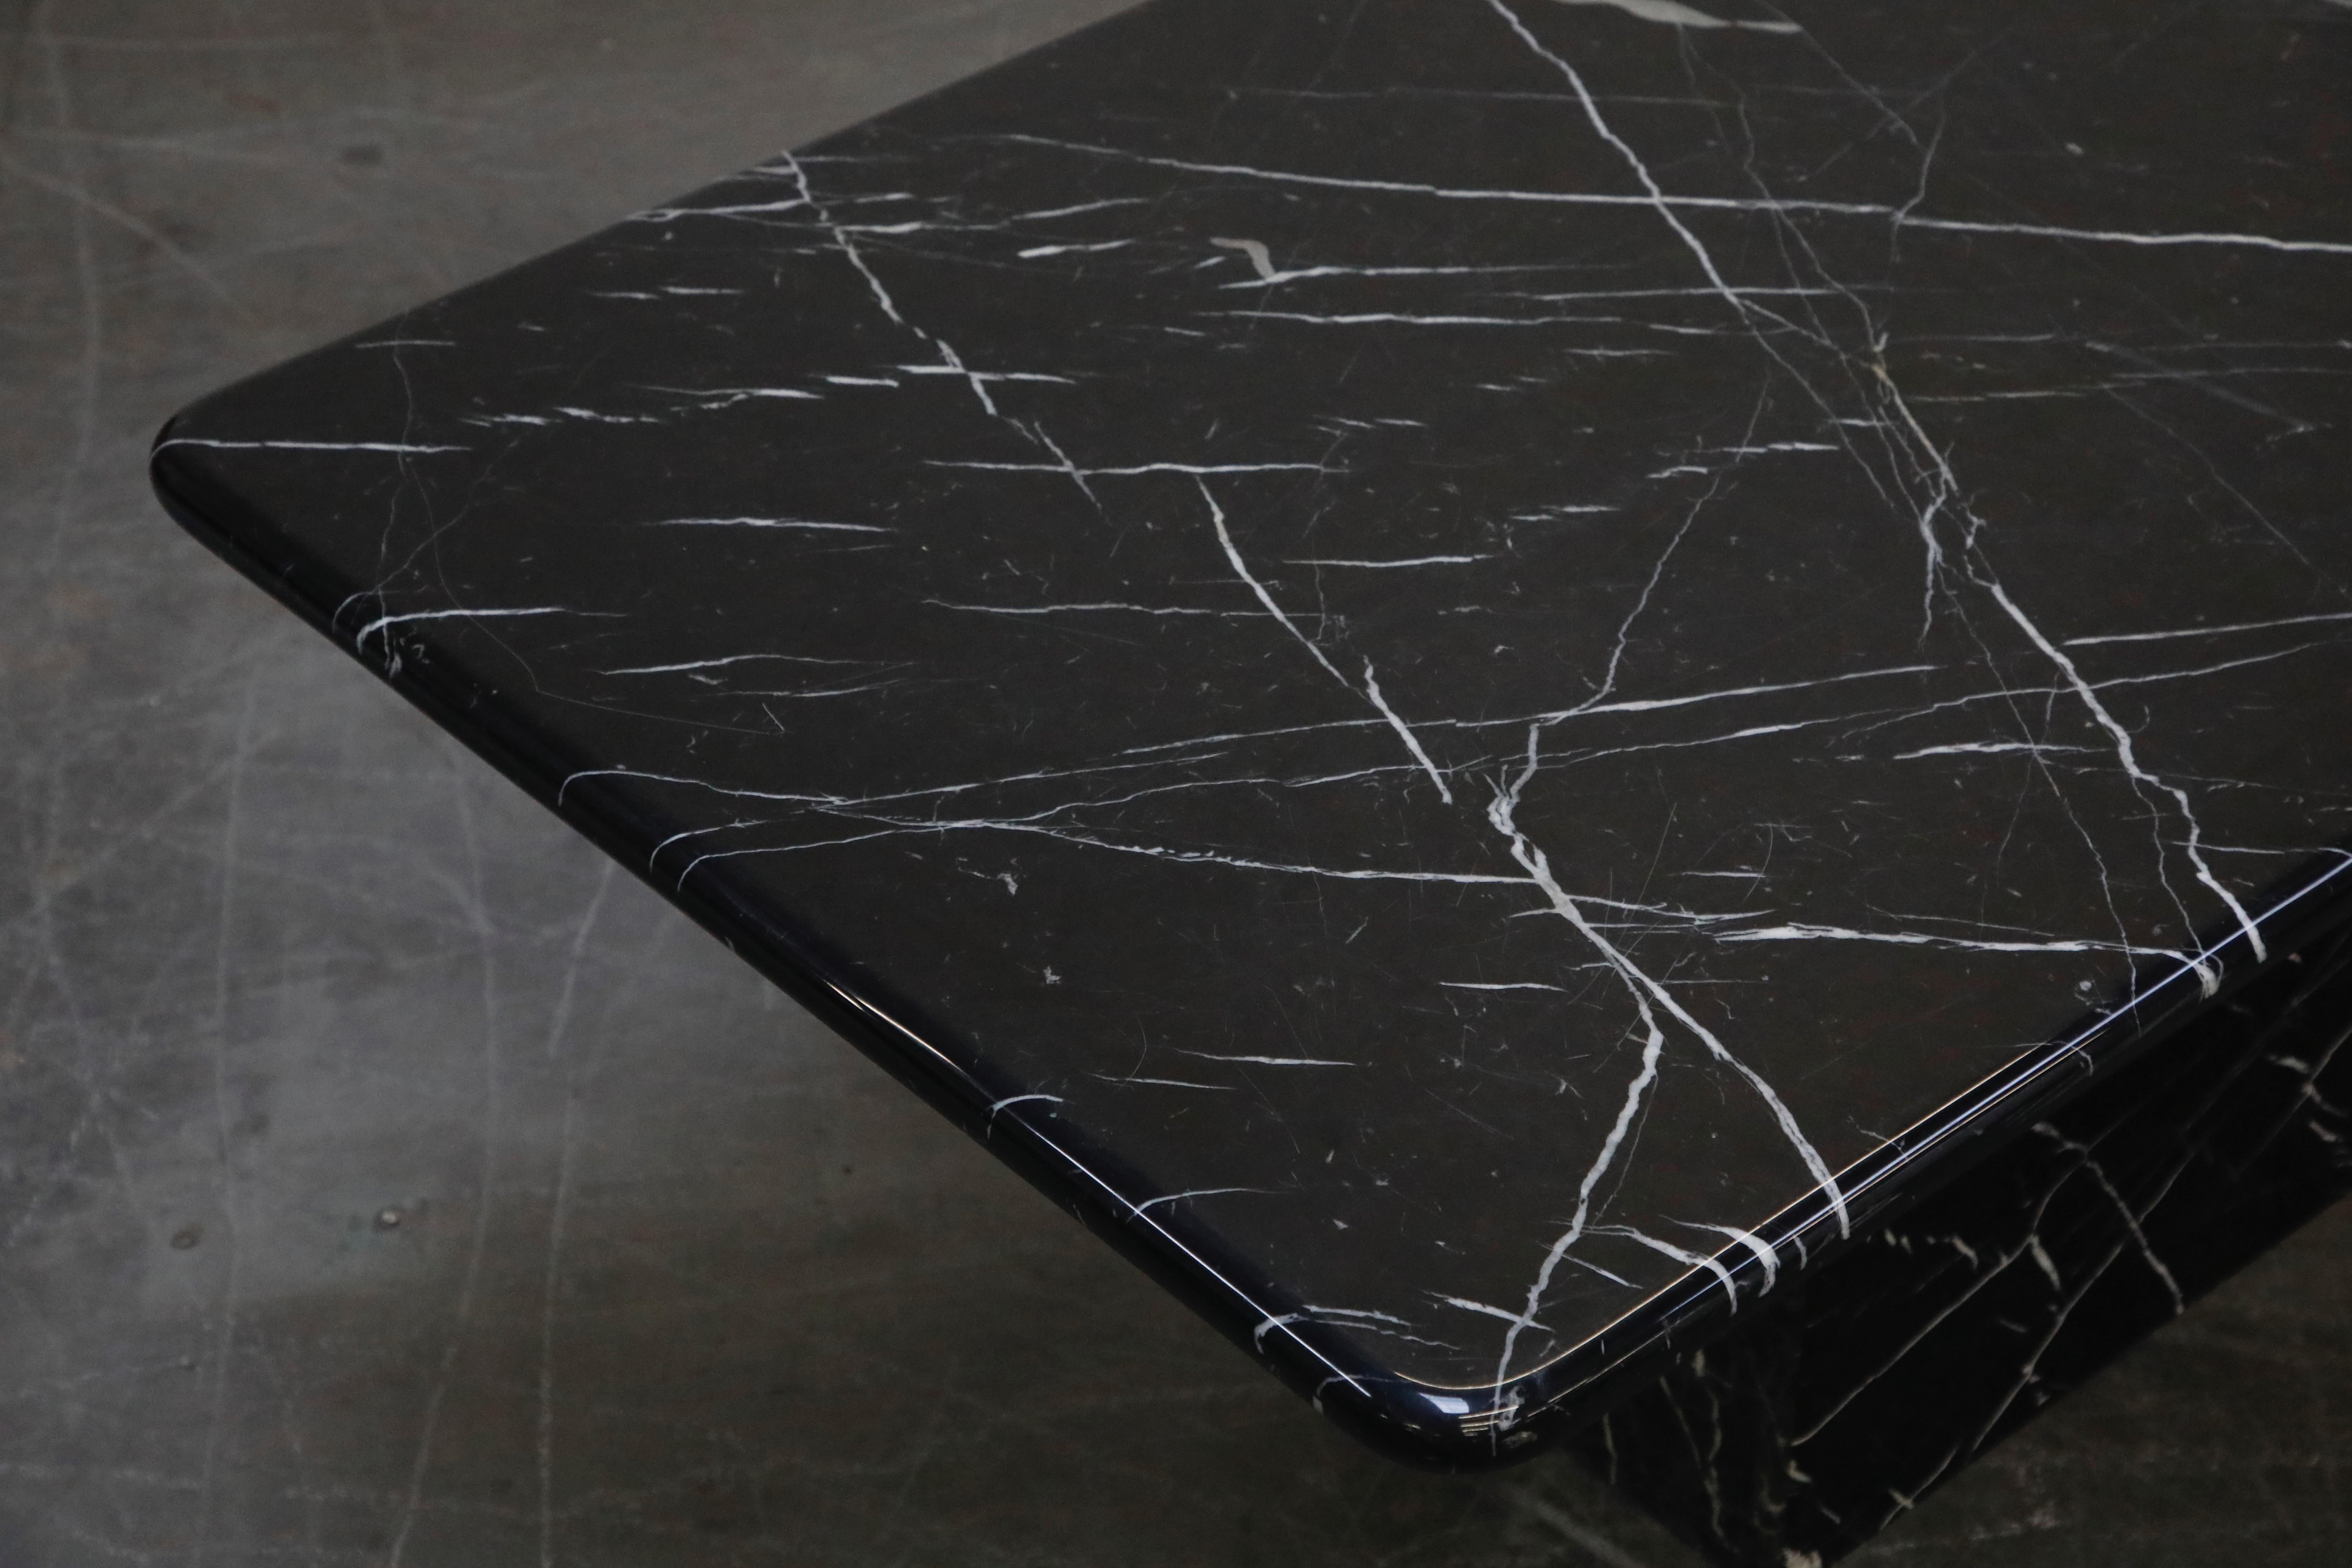 Late 20th Century Post-Modern Black Marble Rectangular Dining or Conference Table, circa 1980s